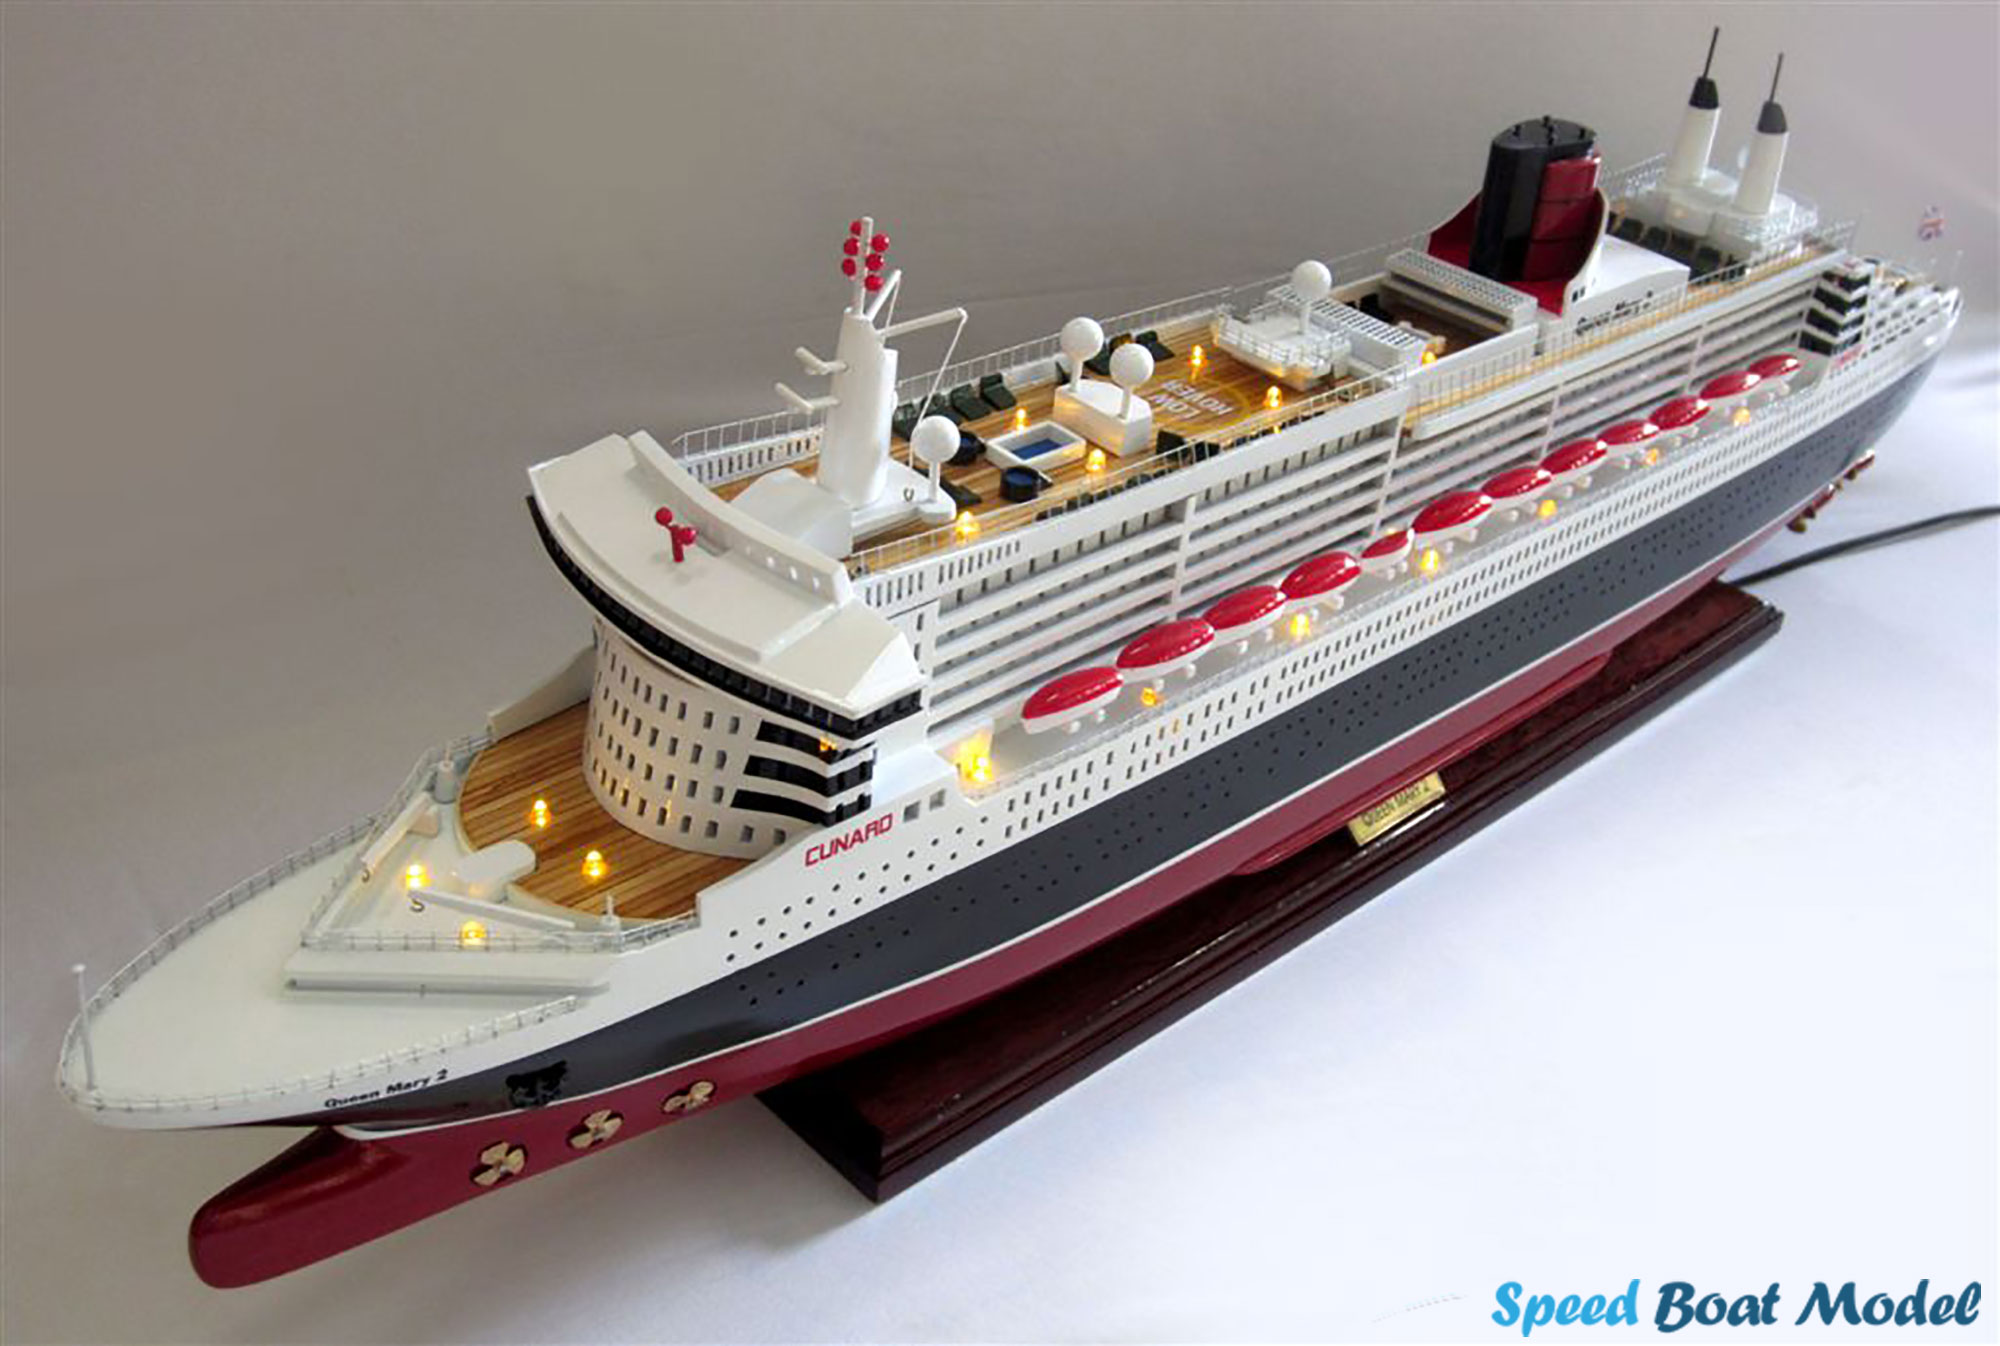 Queen Mary 2 Cruise Ship Model With Lights 39.3"